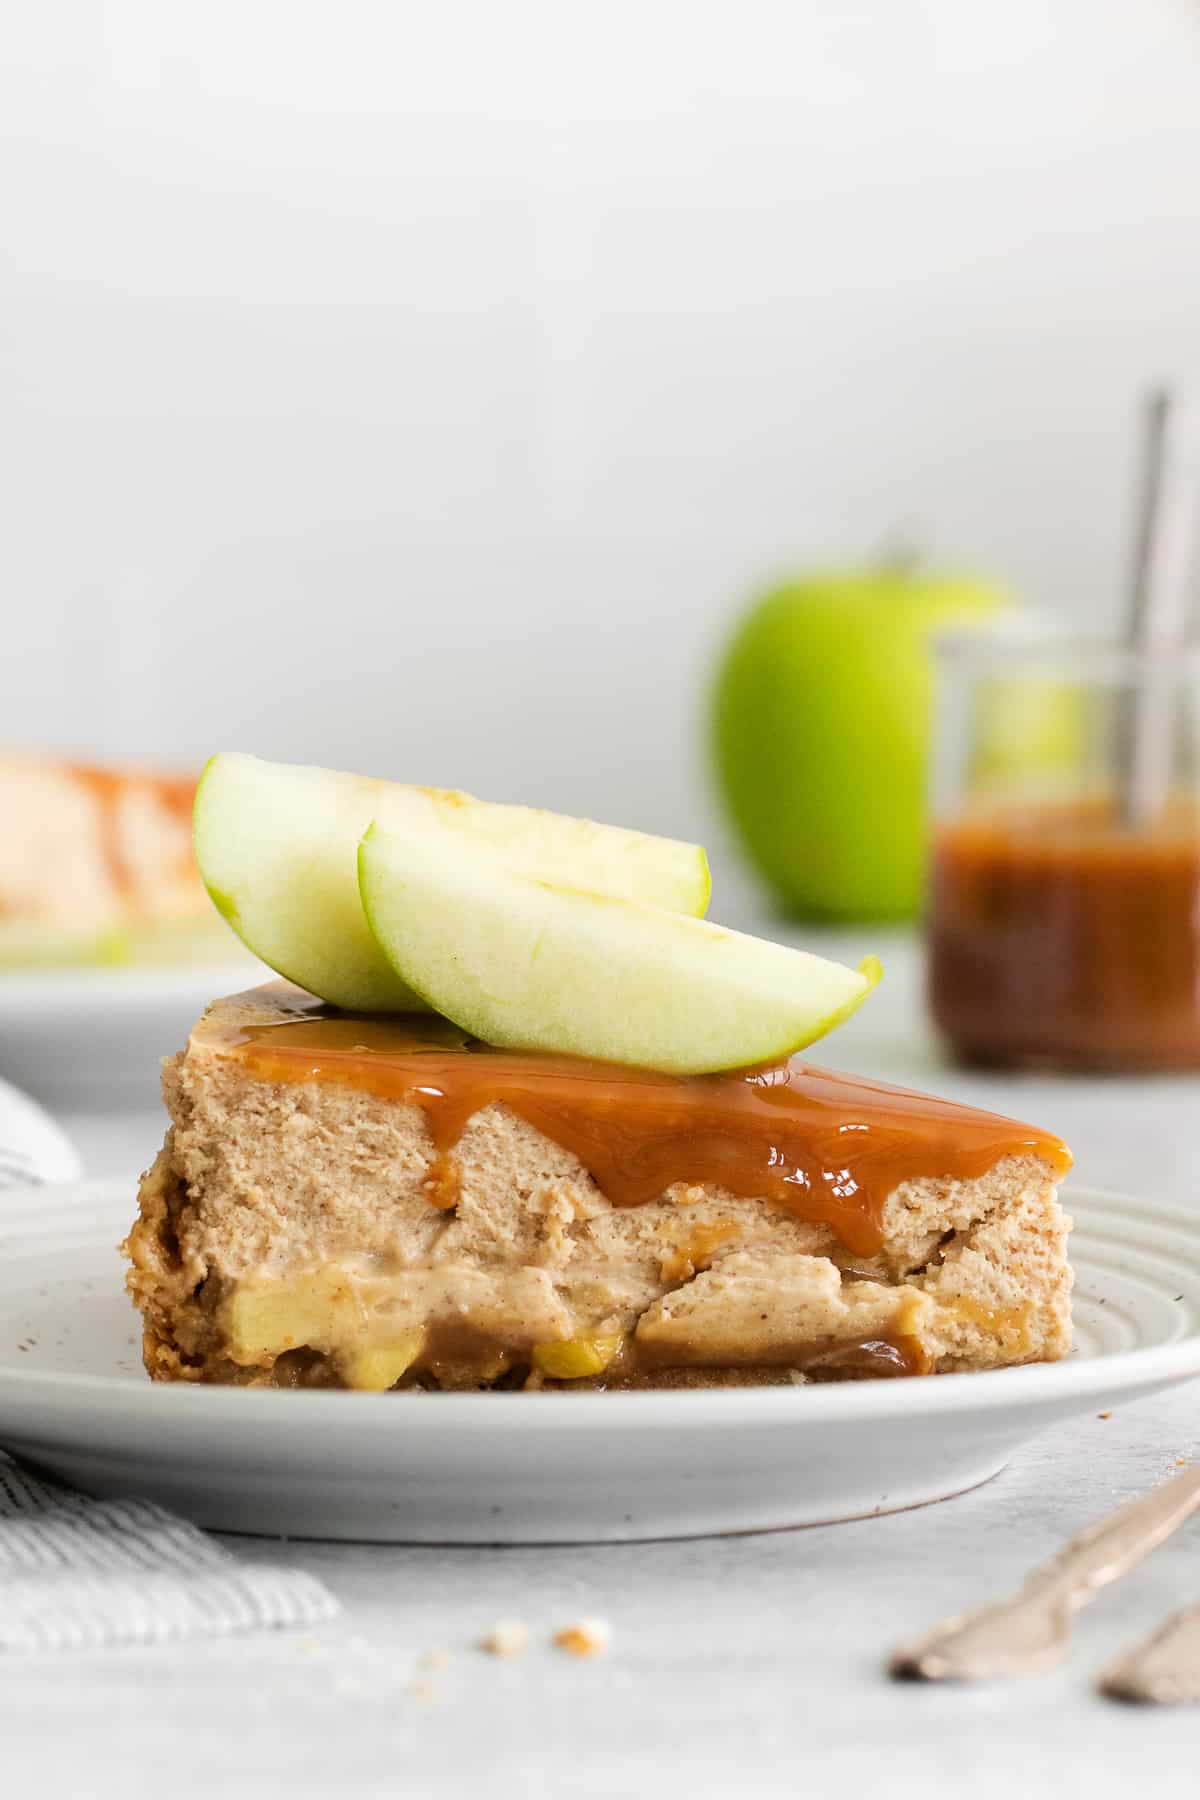 Slice of caramel apple cheesecake on a plate.